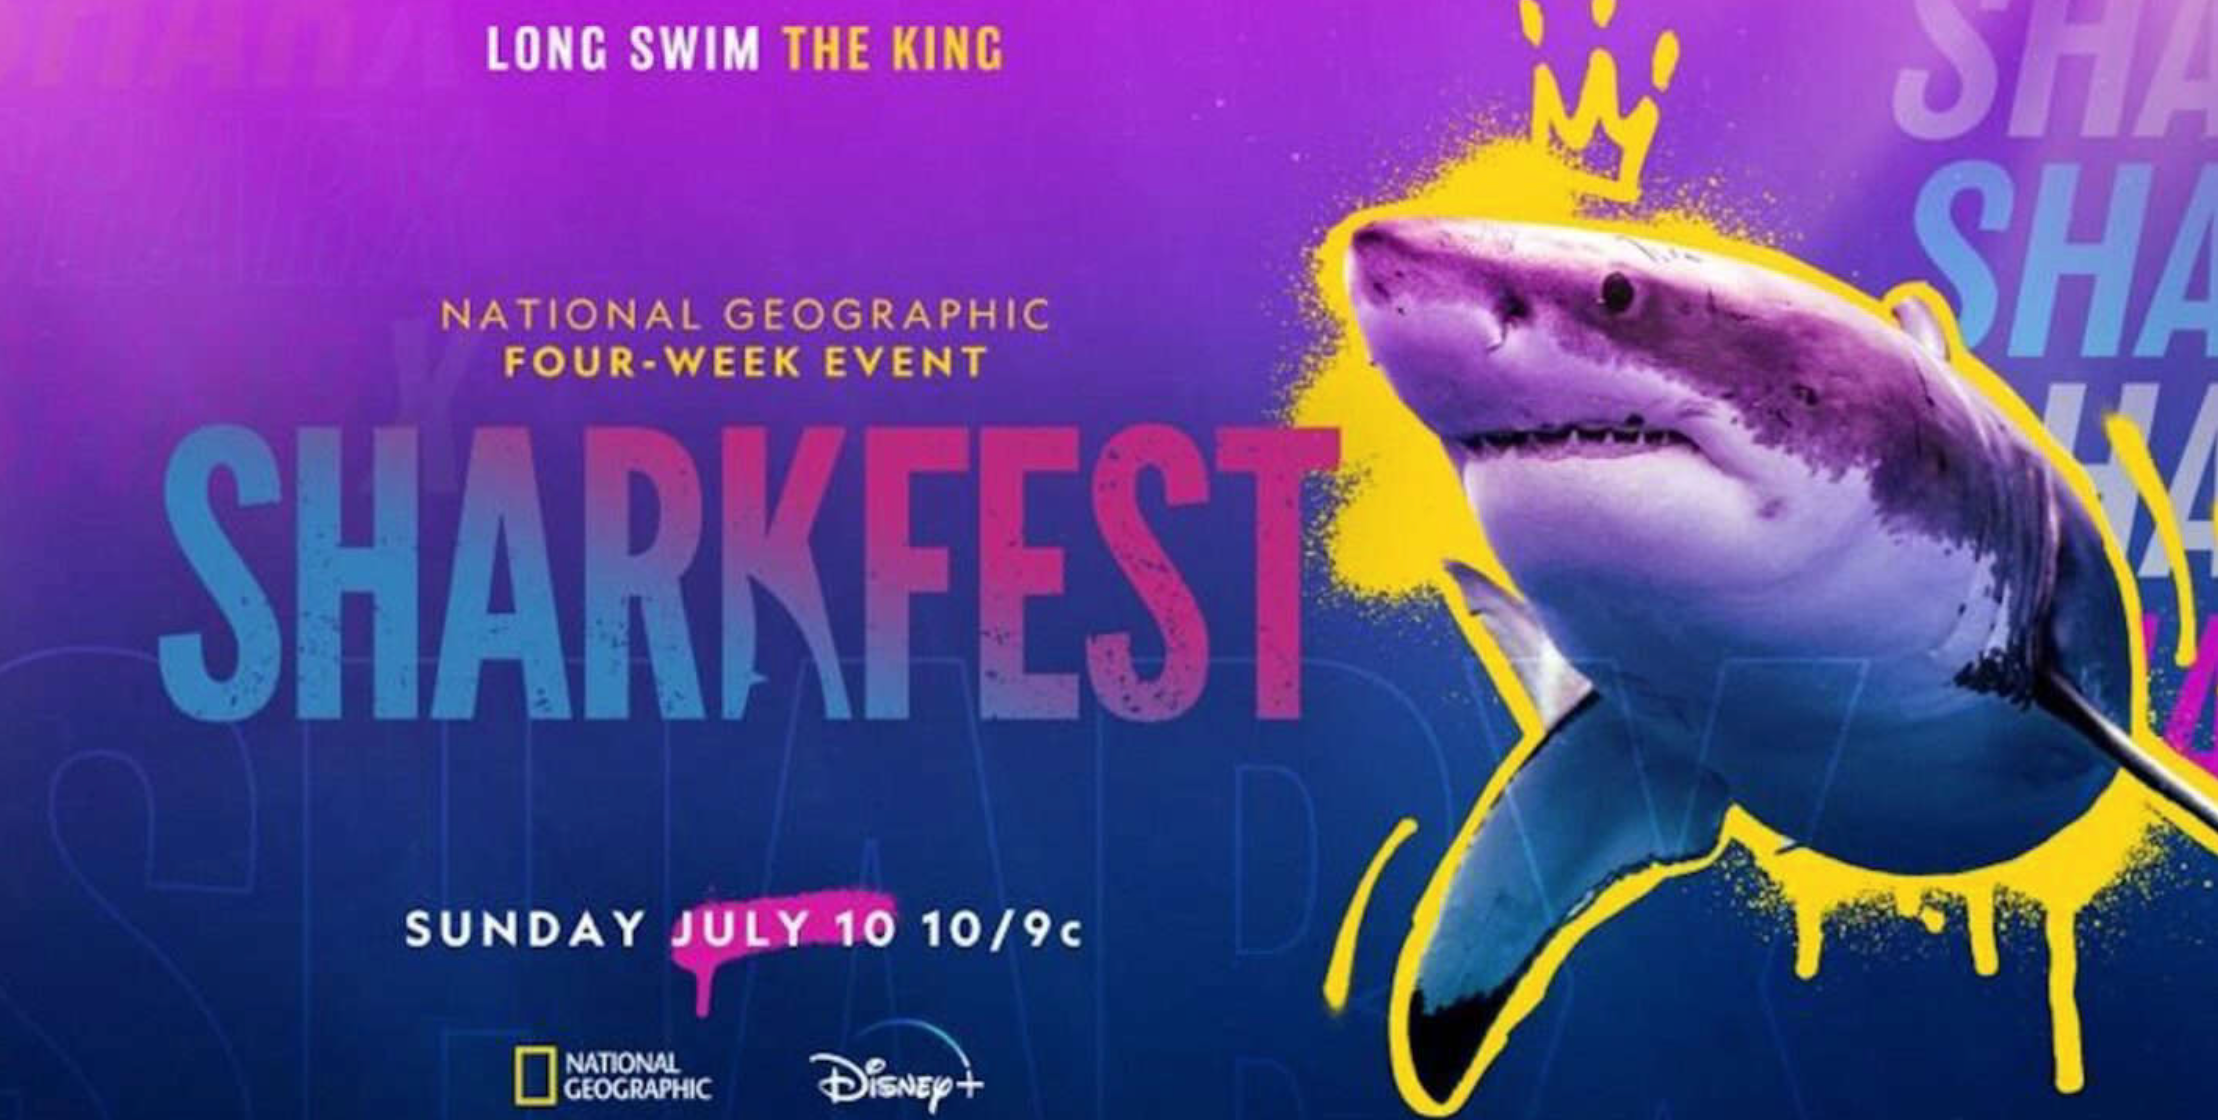 Sharks on NBCS on X: It's going to be a special day celebrating